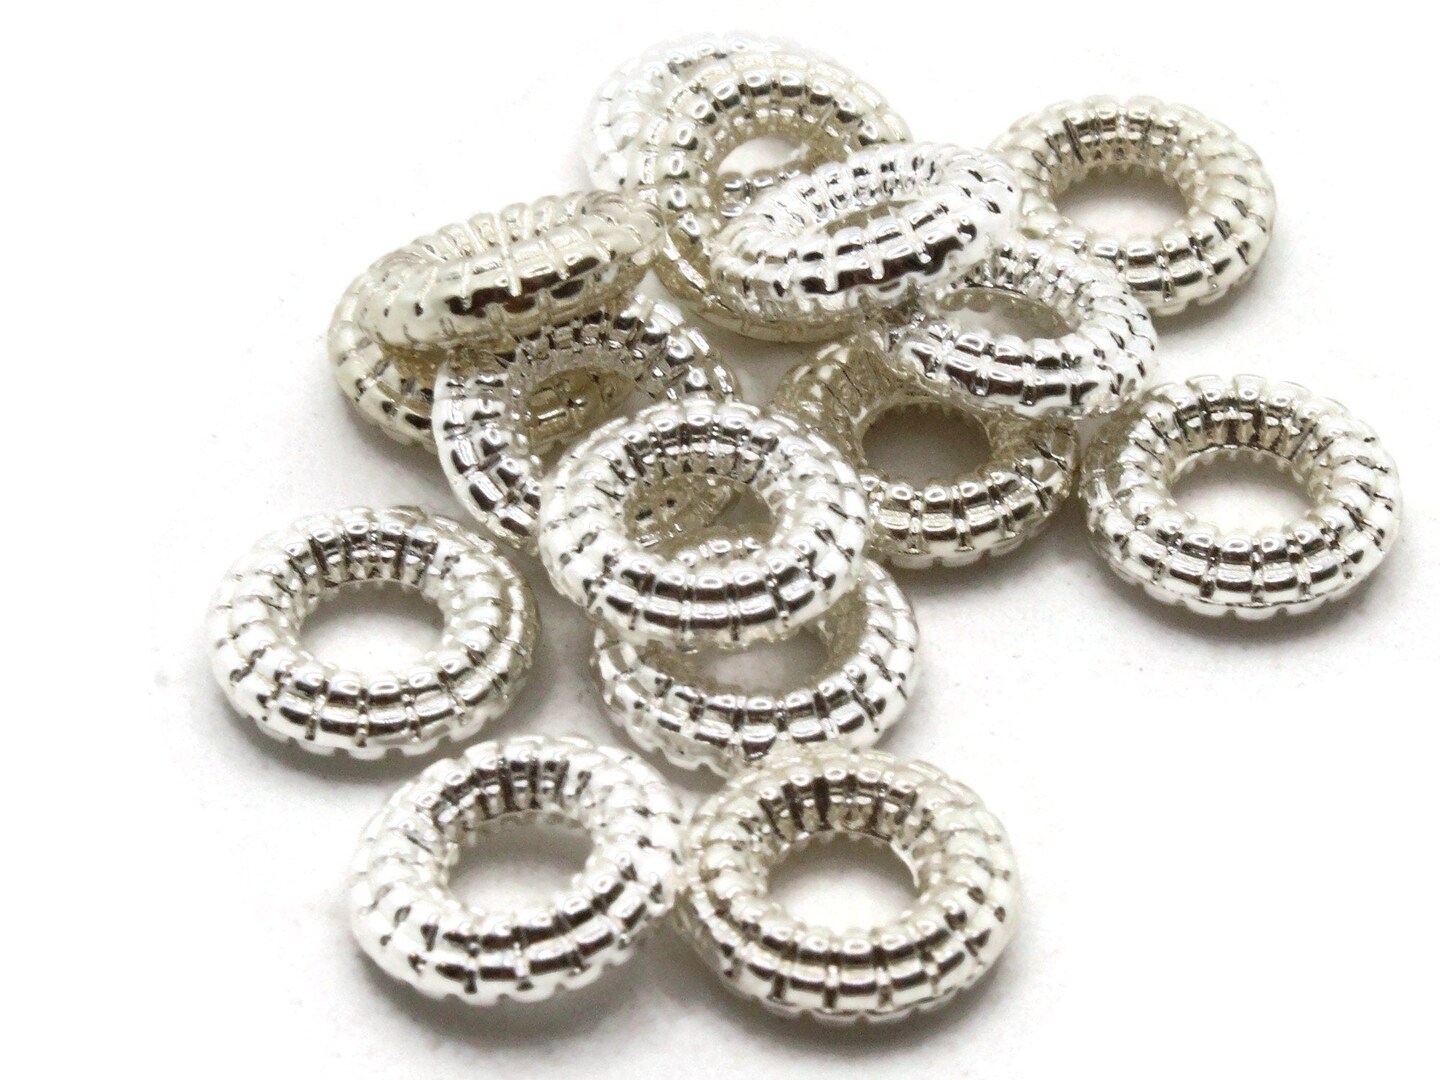 15 12mm Vintage Silver Plated Plastic Bumpy Round Ring Beads